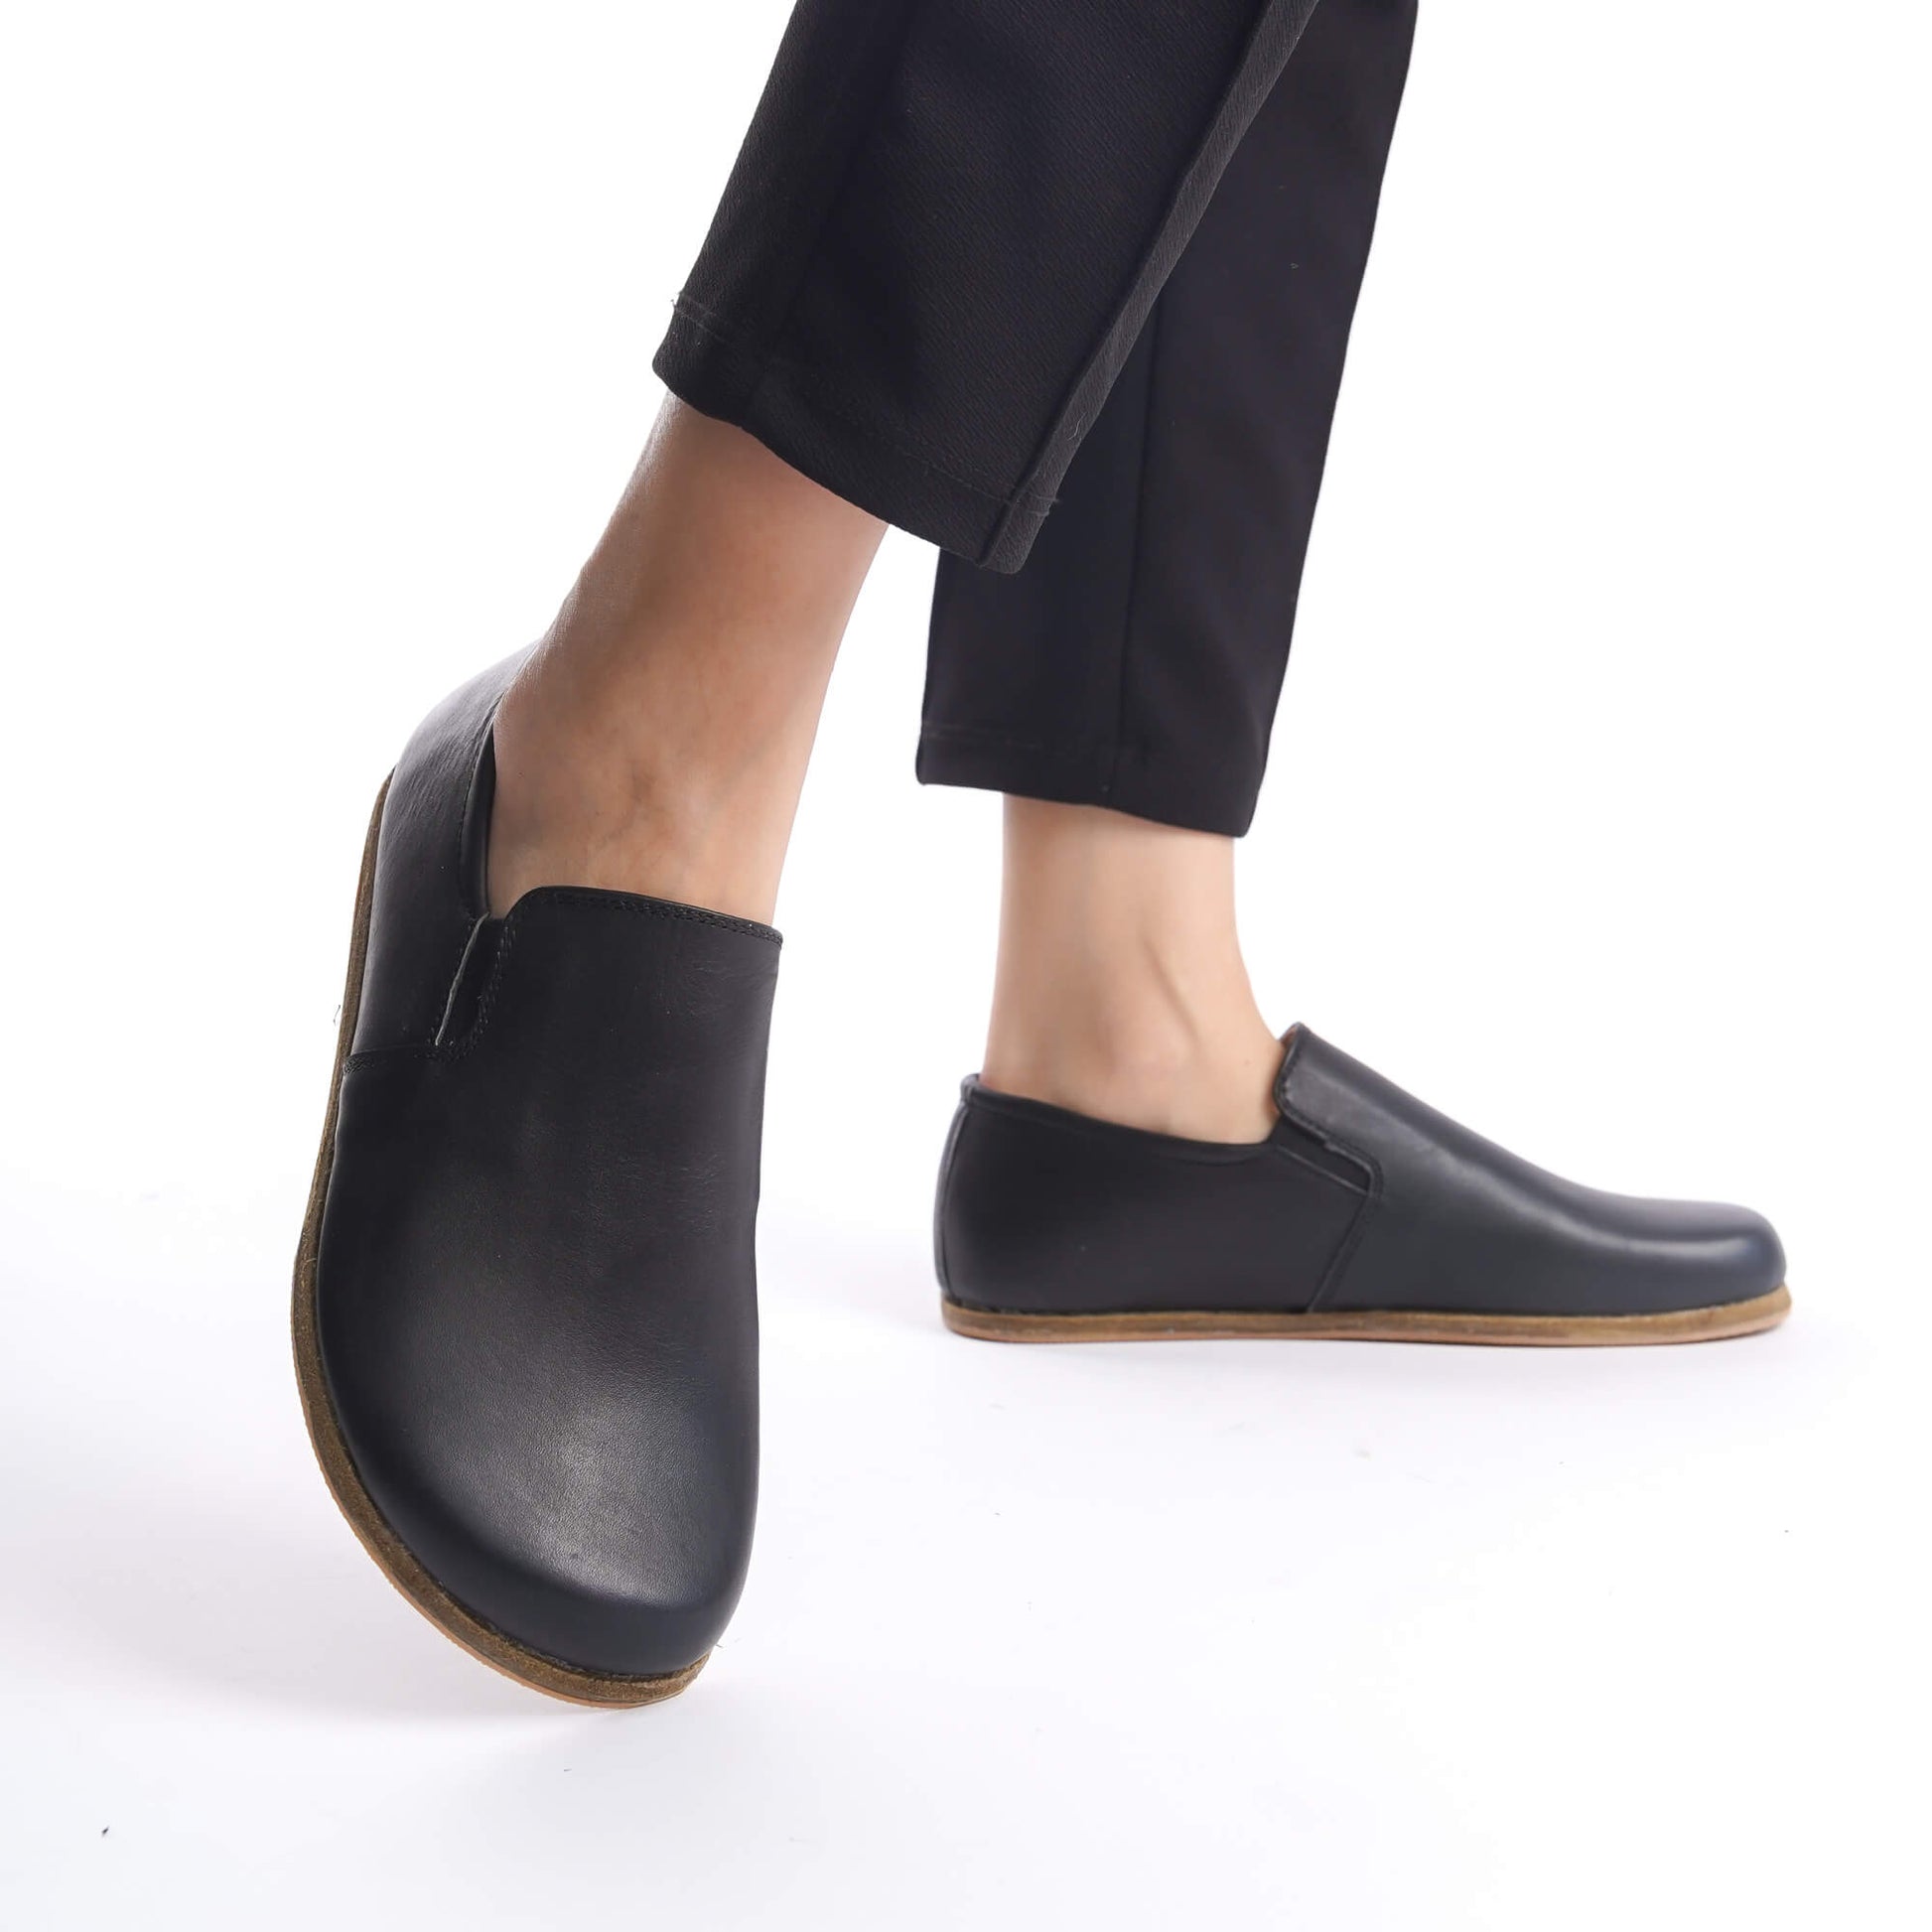 Ionia Black Leather Loafers - Side Profile in Motion